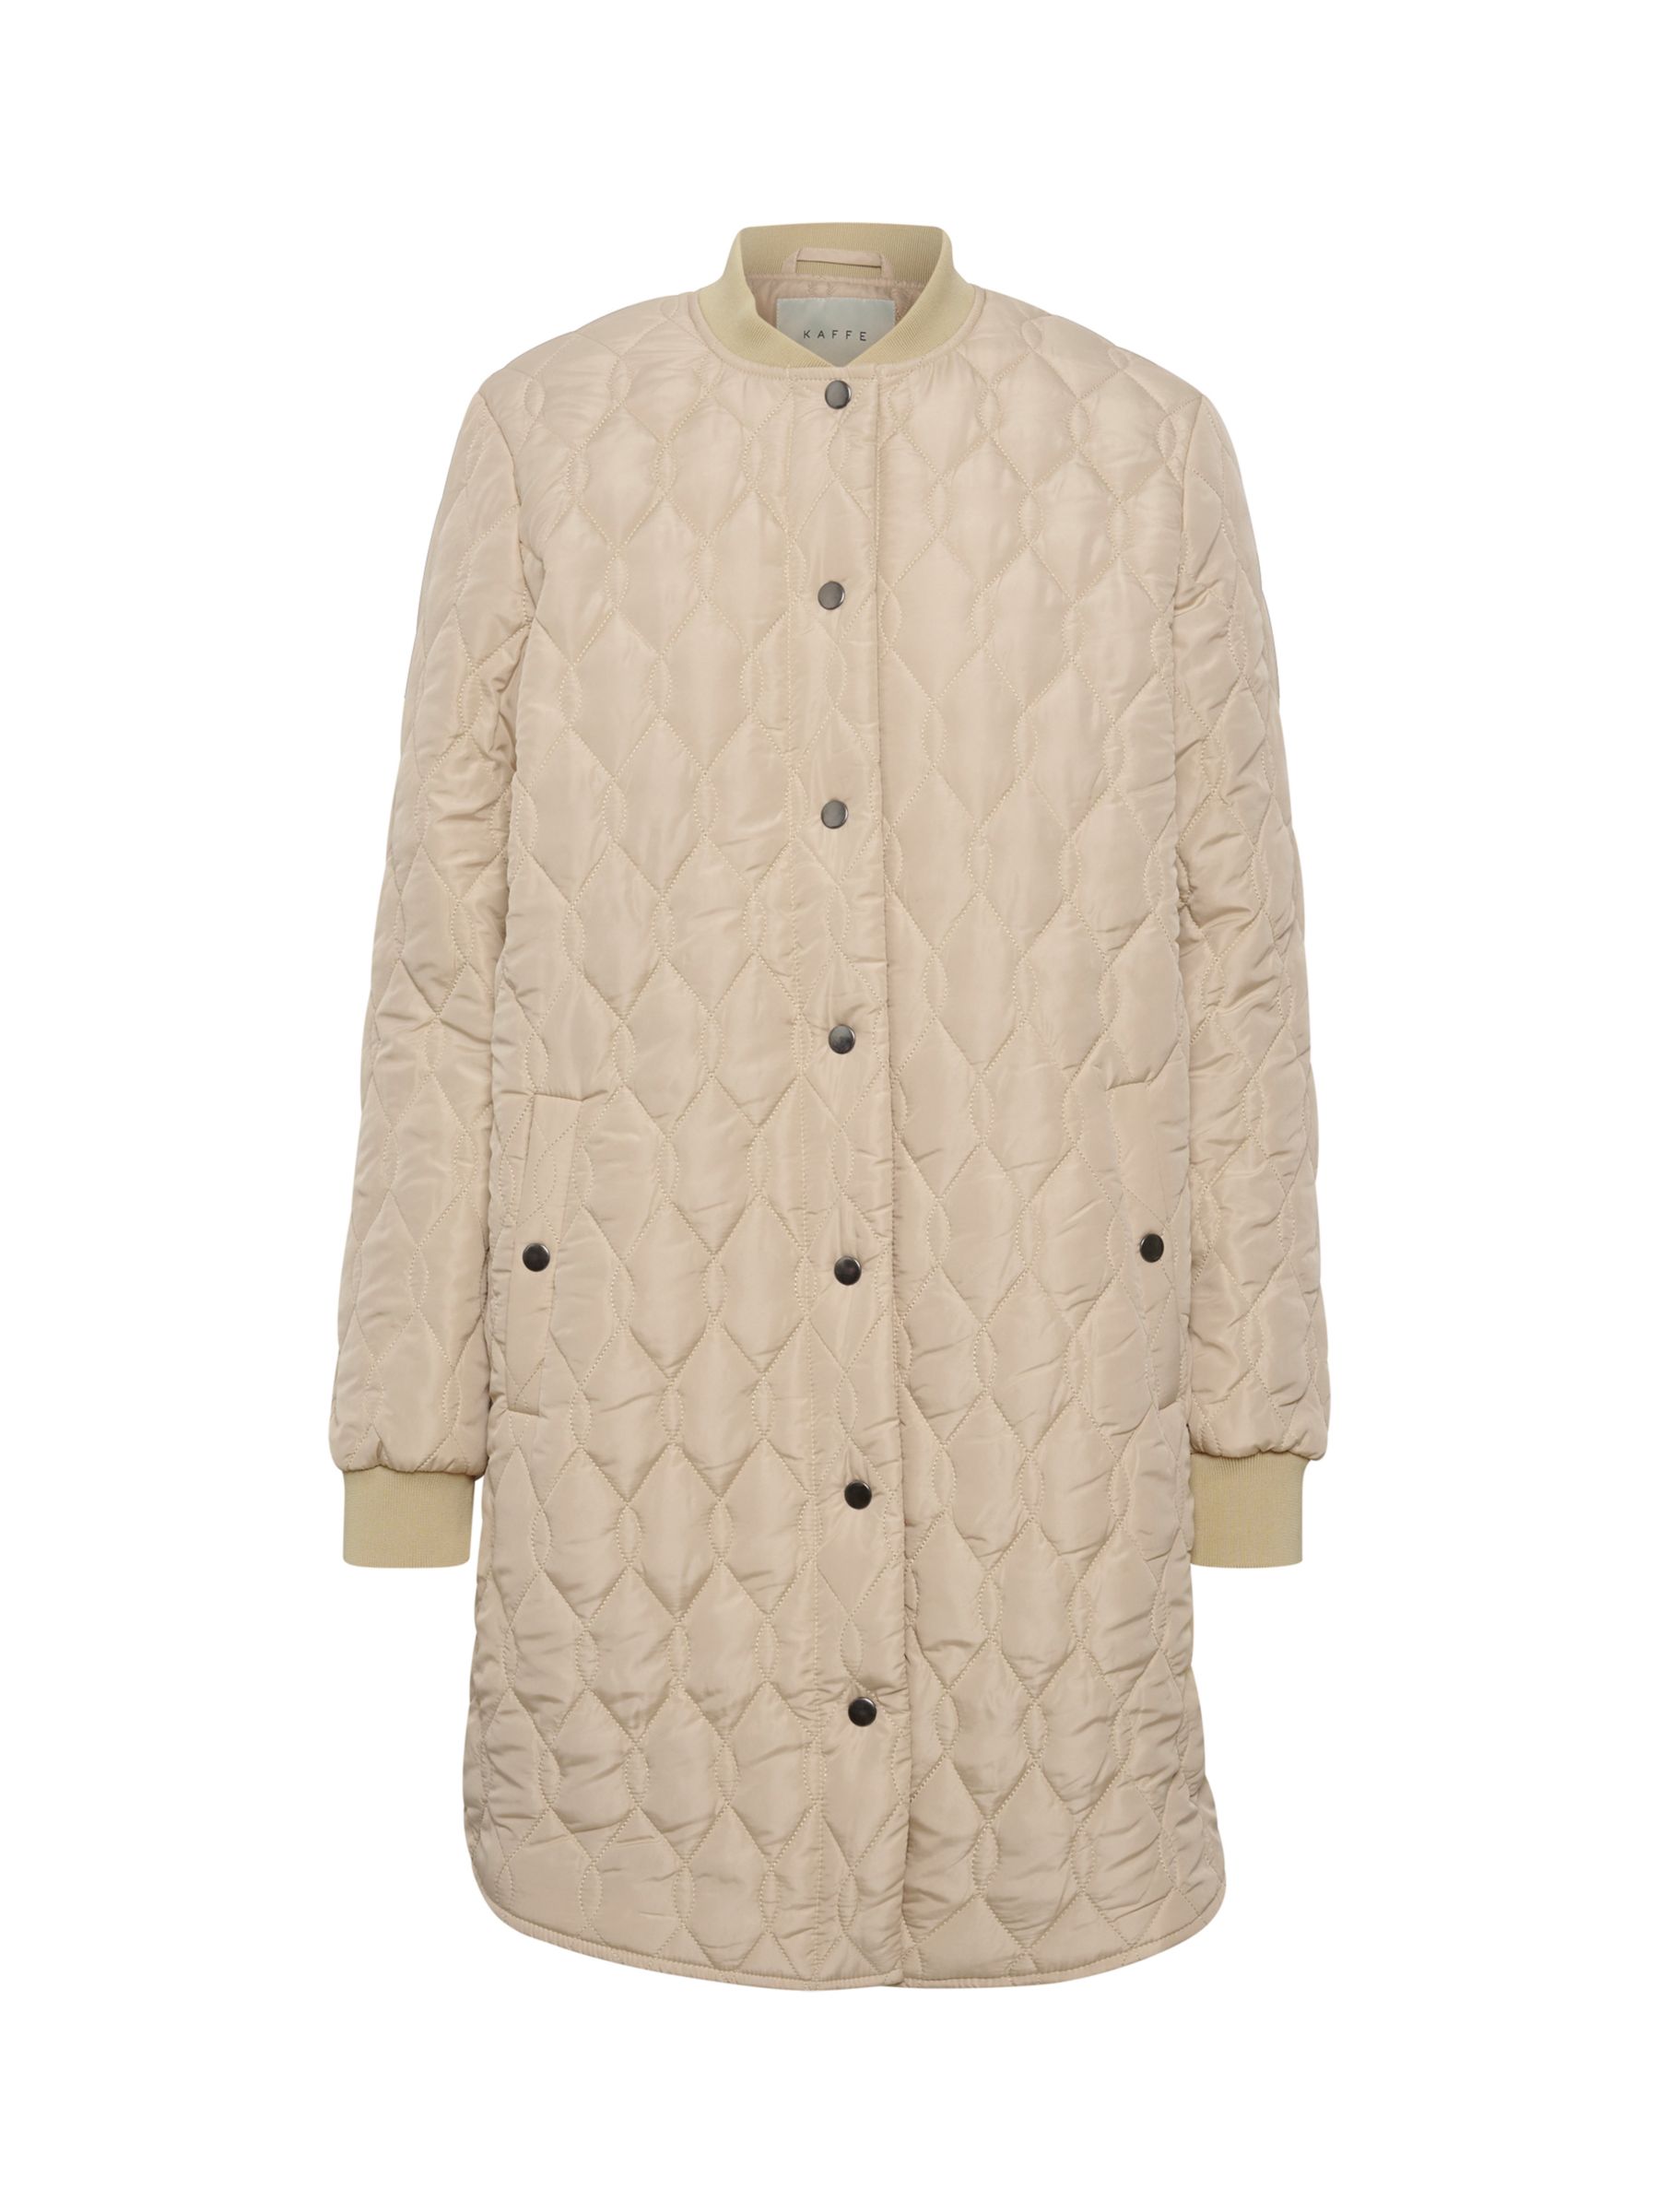 KAFFE Shally Quilted Coat, Cream at John Lewis & Partners